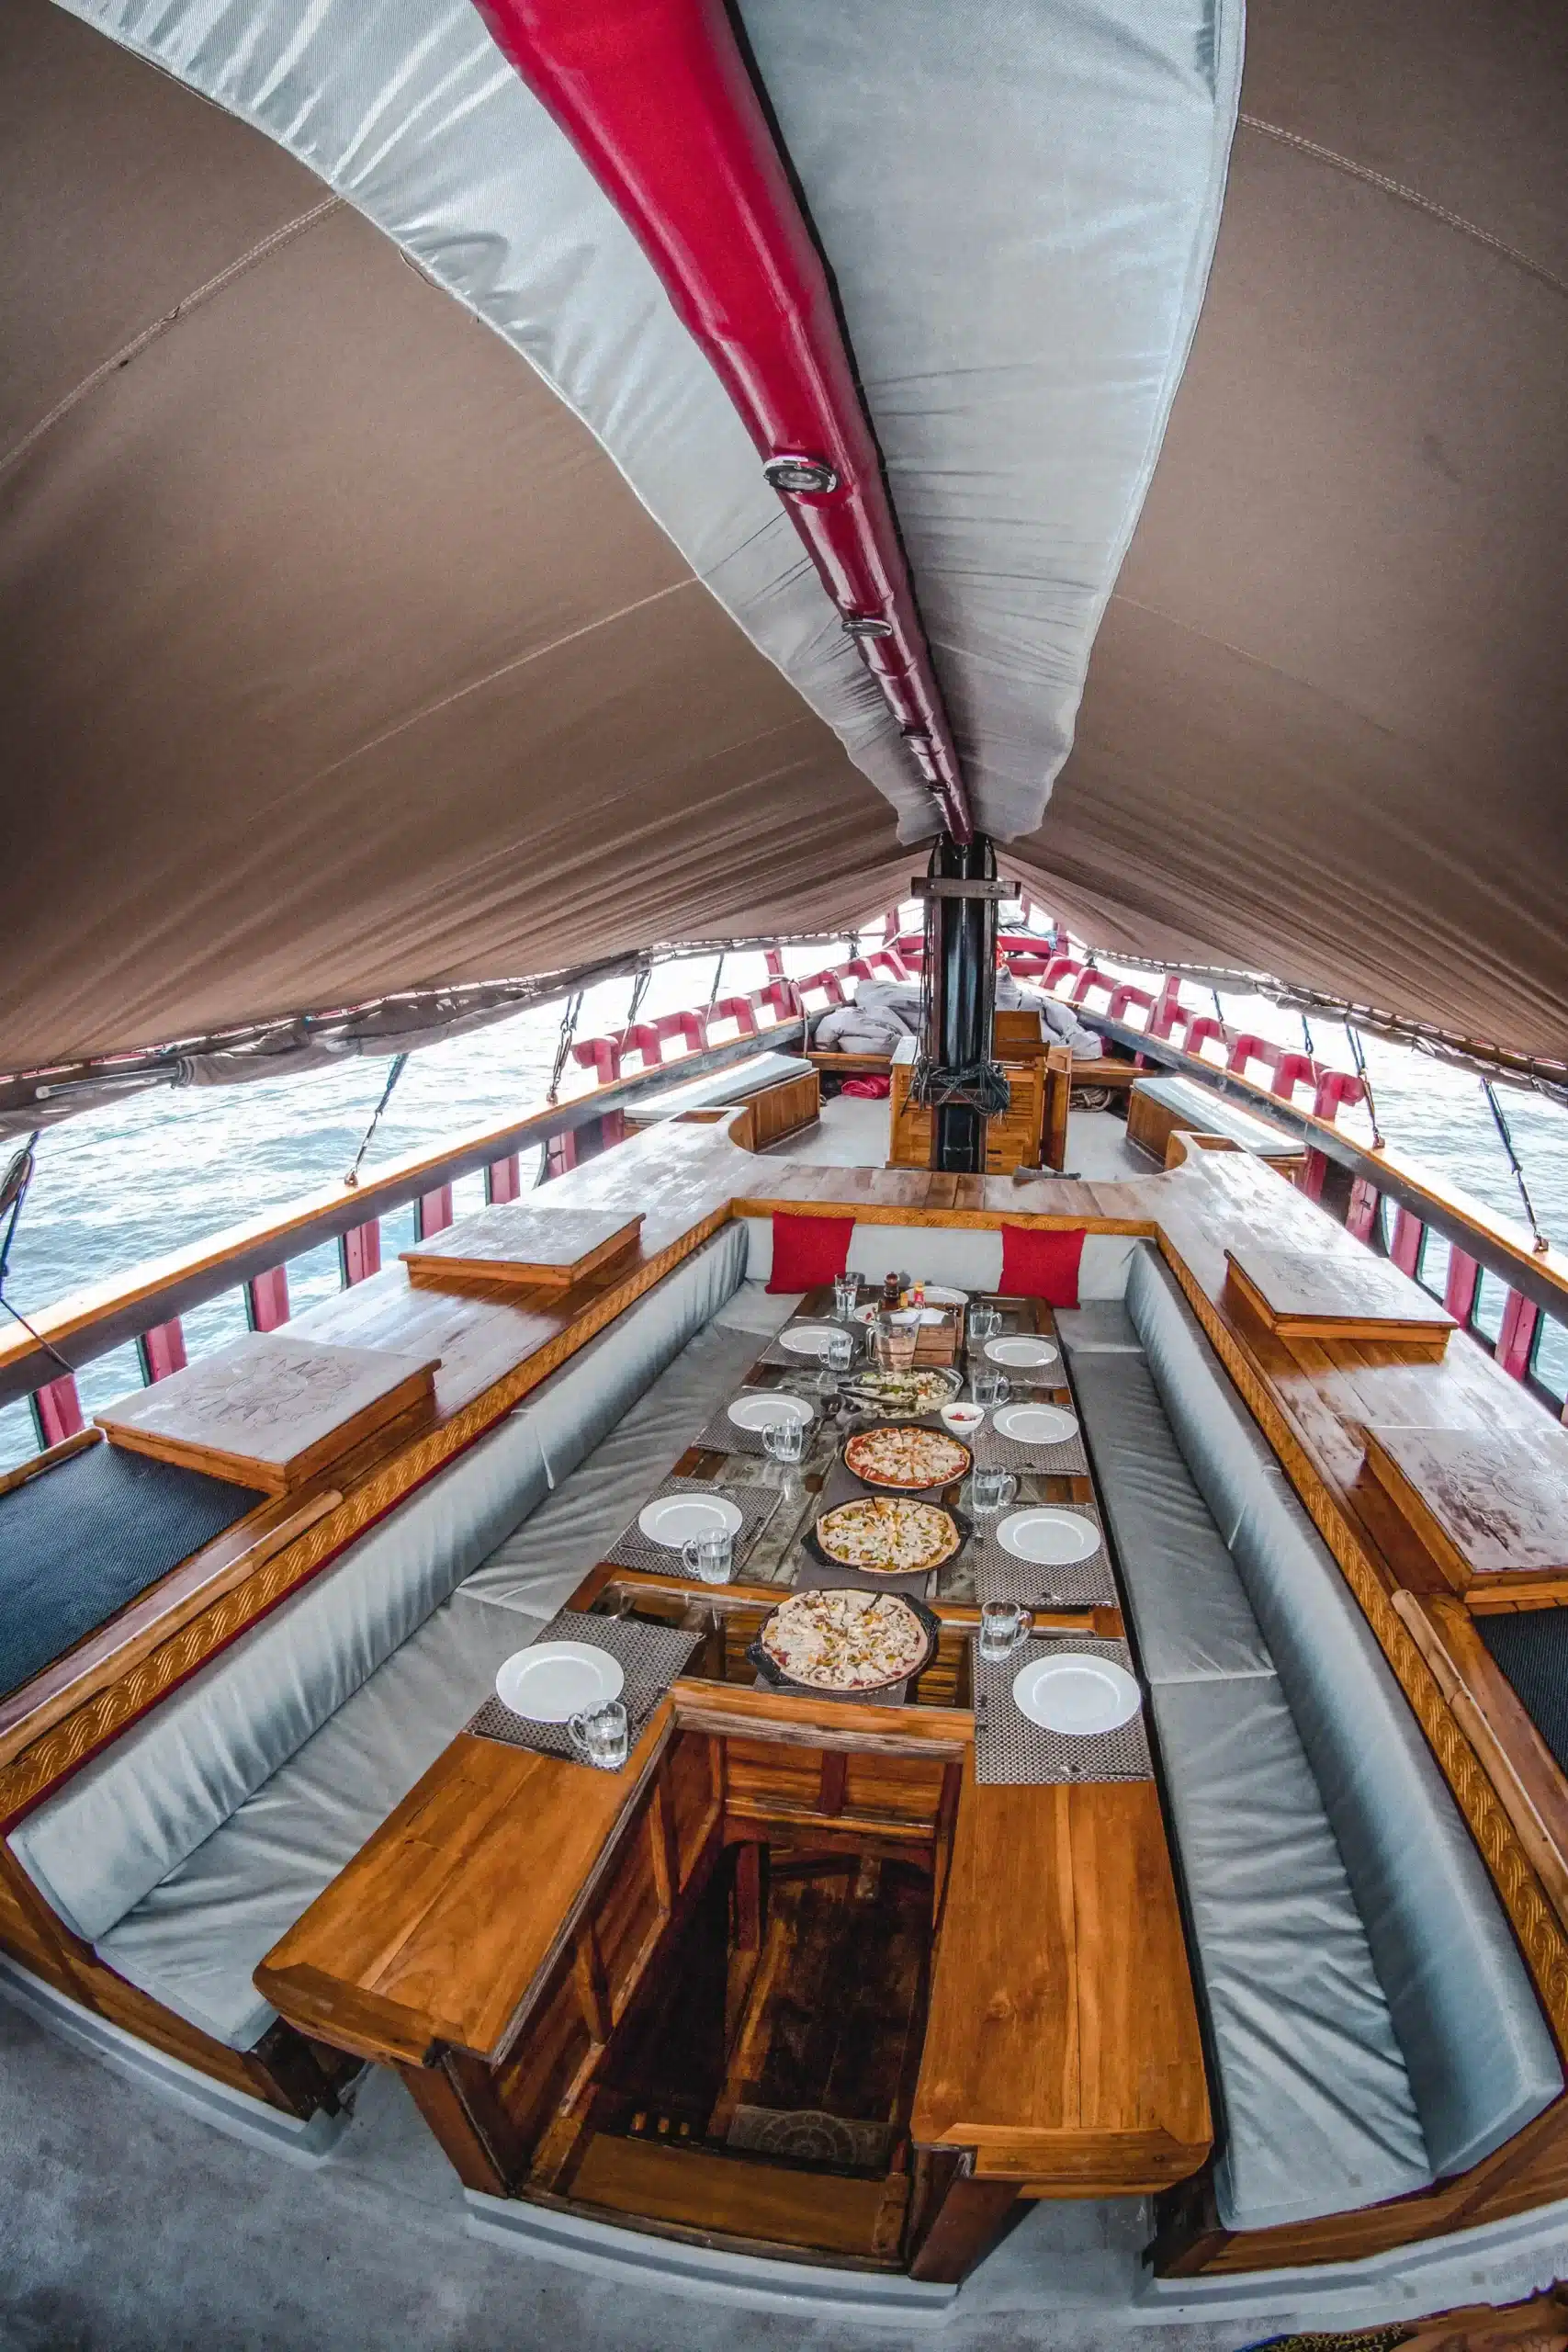 DINING AREA on boat